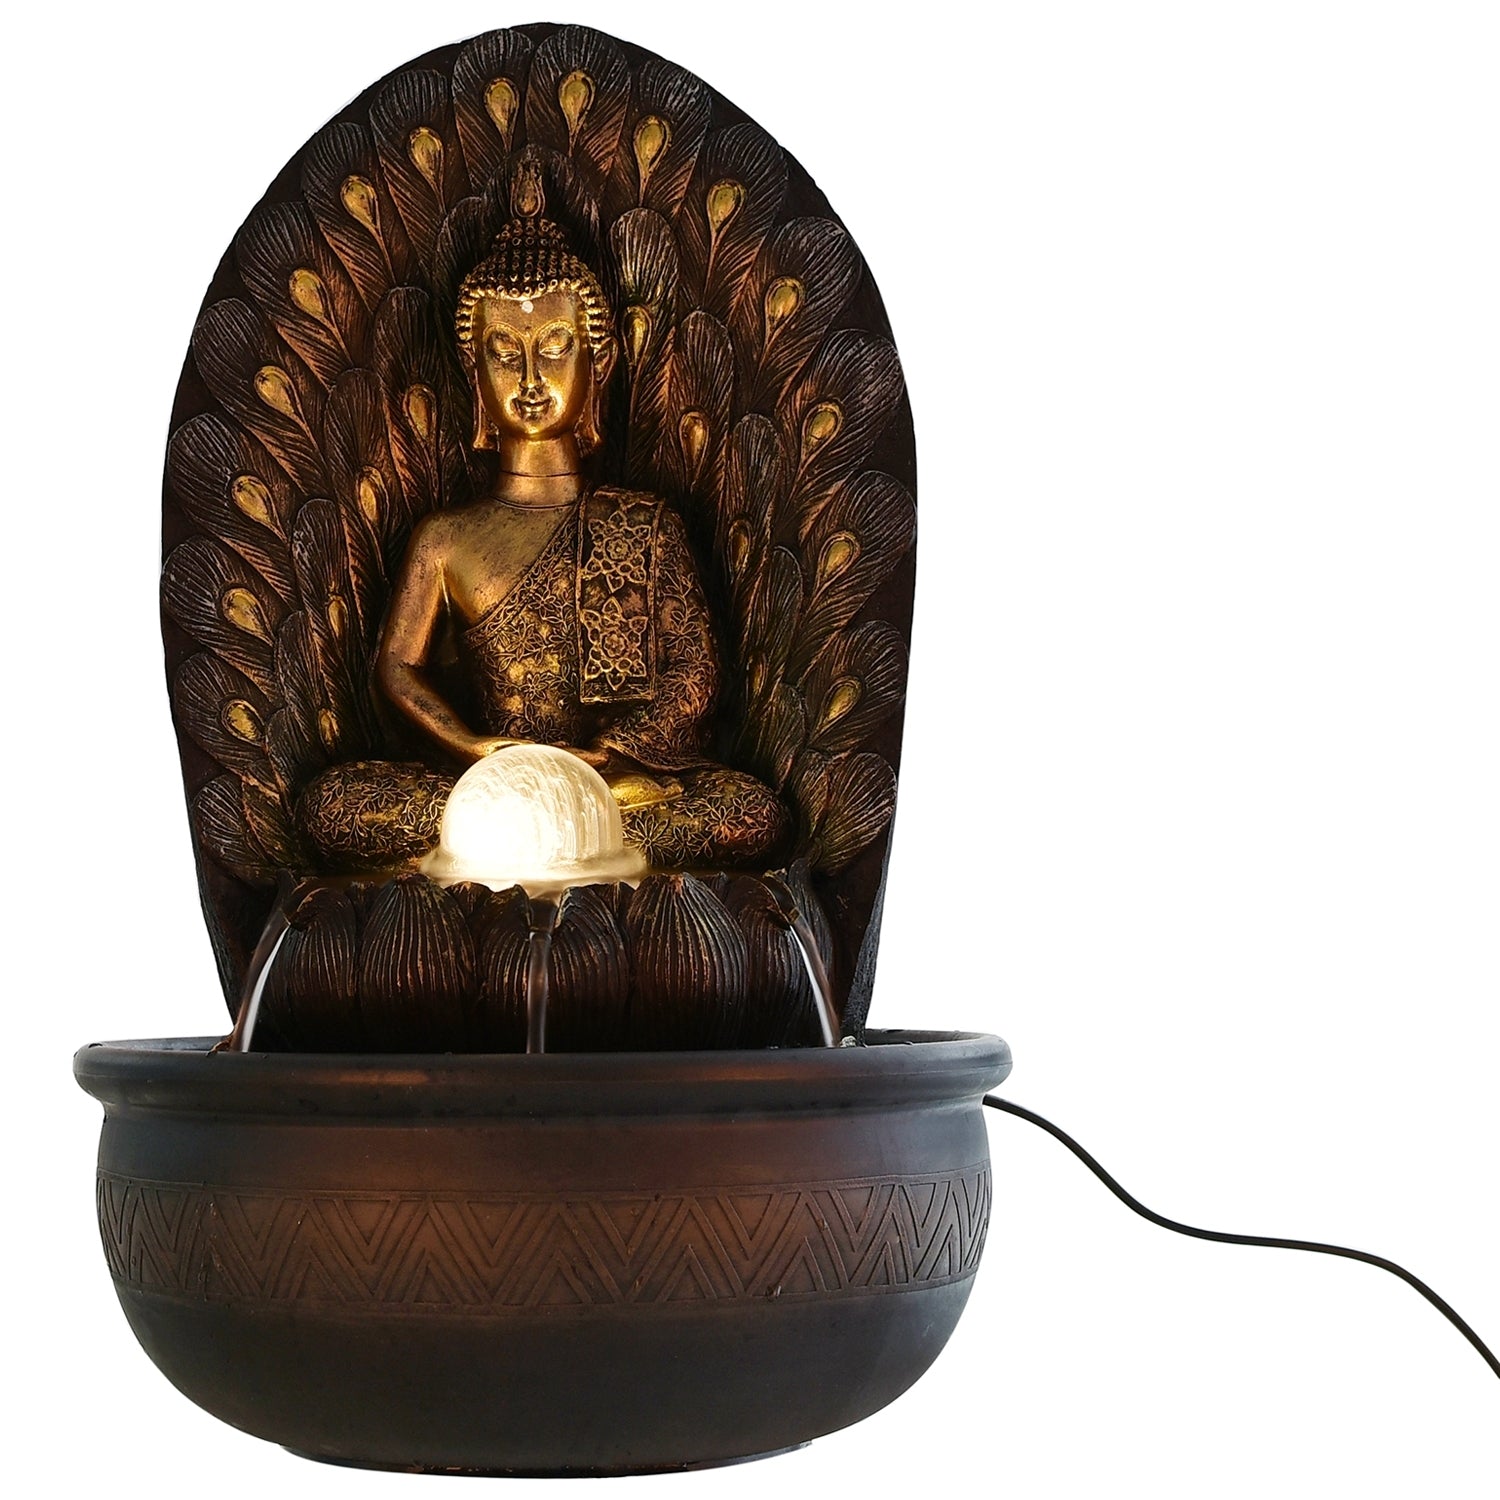 Polystone Leaf Textured Brown and Golden Meditating Buddha Idol Water Fountain With Crystal Ball for Home/Office Decor